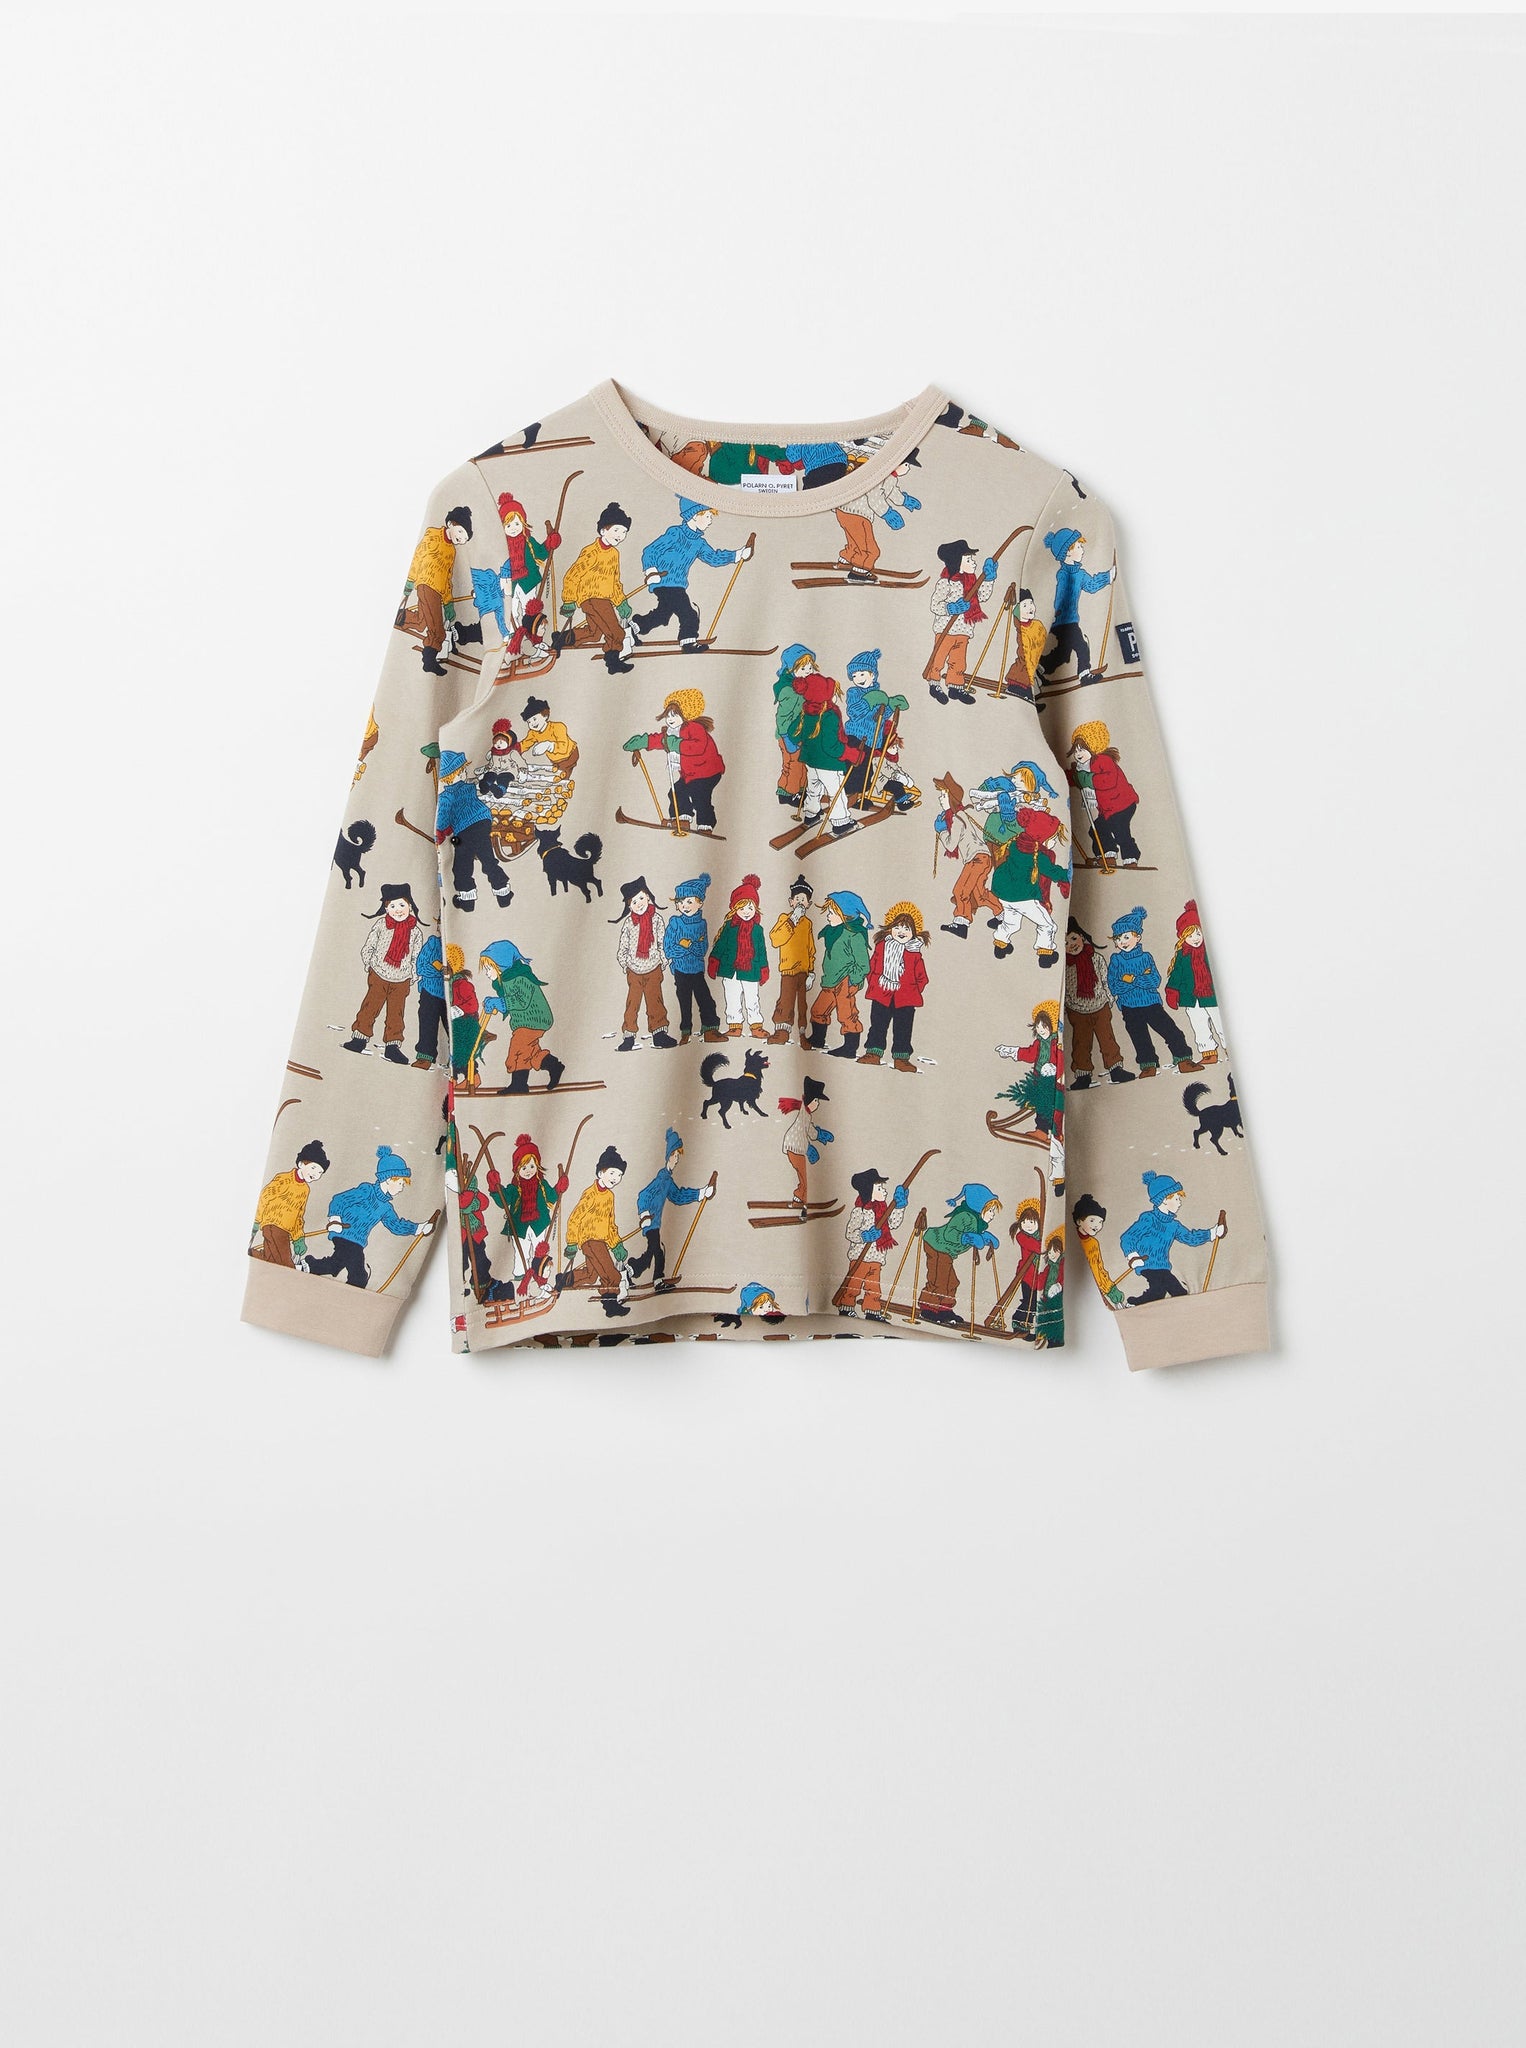 Organic Cotton Nordic Winter Kids Top from the Polarn O. Pyret kidswear collection. Nordic kids clothes made from sustainable sources.